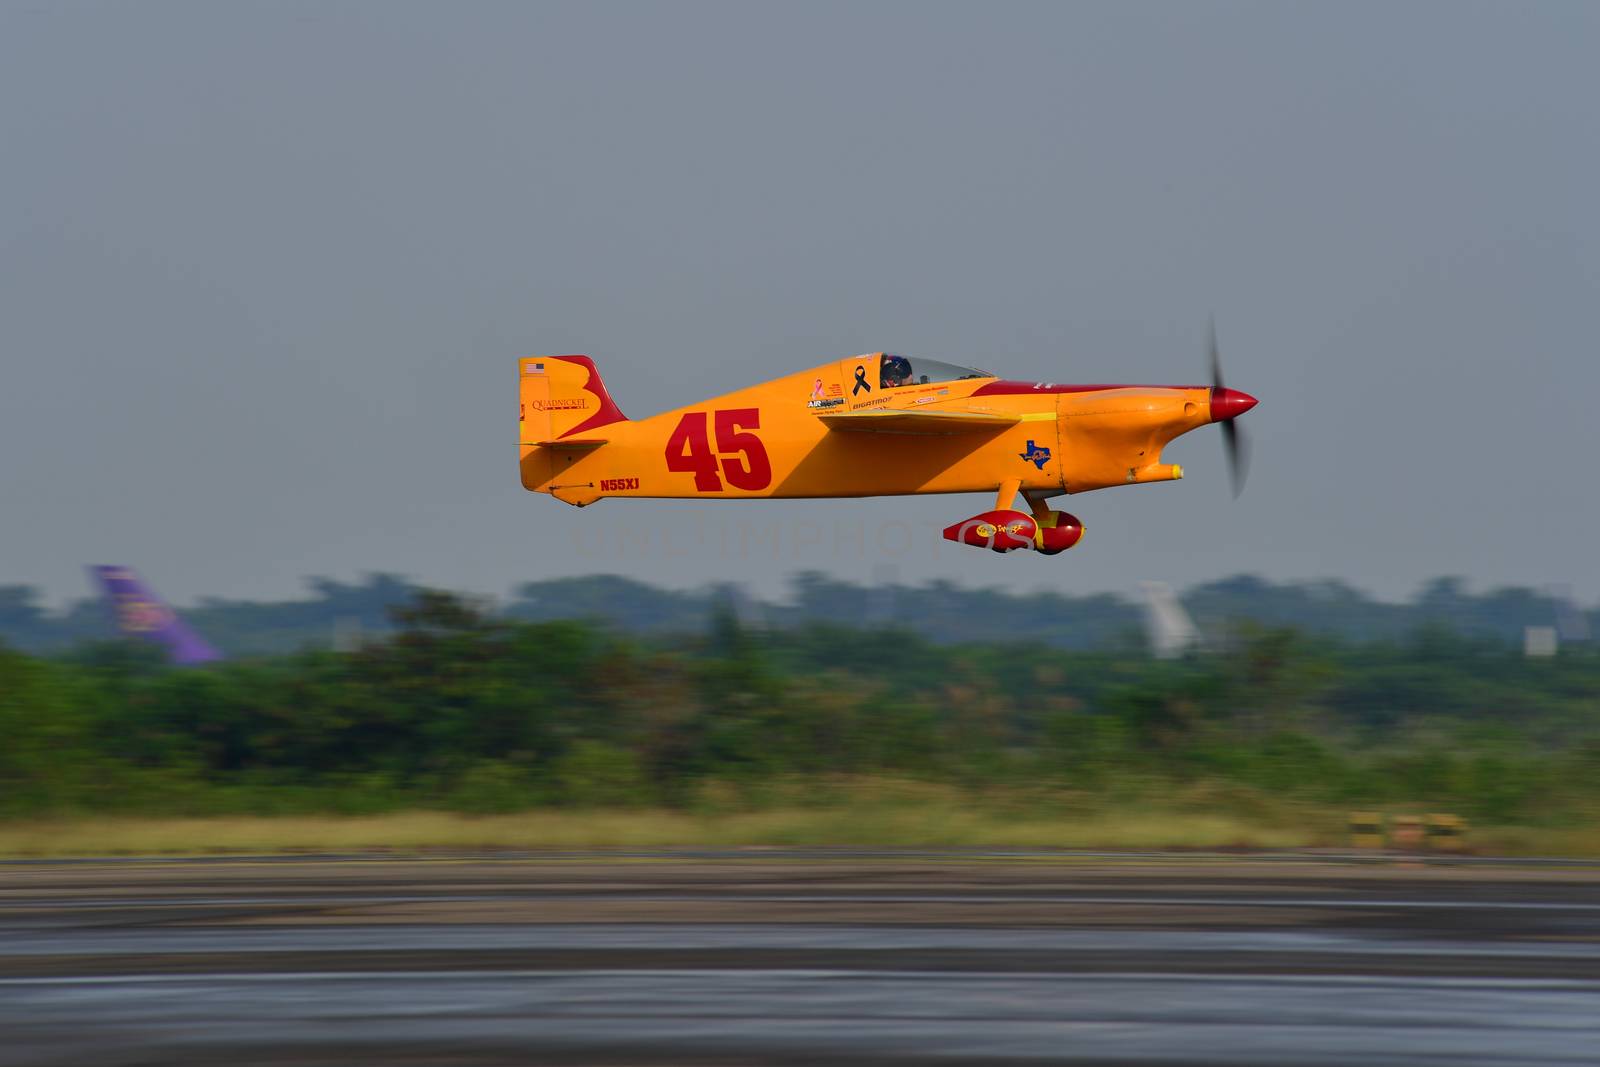 CHONBURI - NOVEMBER 20 : Justin Meaders pilot of USA with Quadnickel aircraft in Air Race 1 Thailand at U-Tapao International Airport on November 20, 2016 in Chonburi, Thailand.